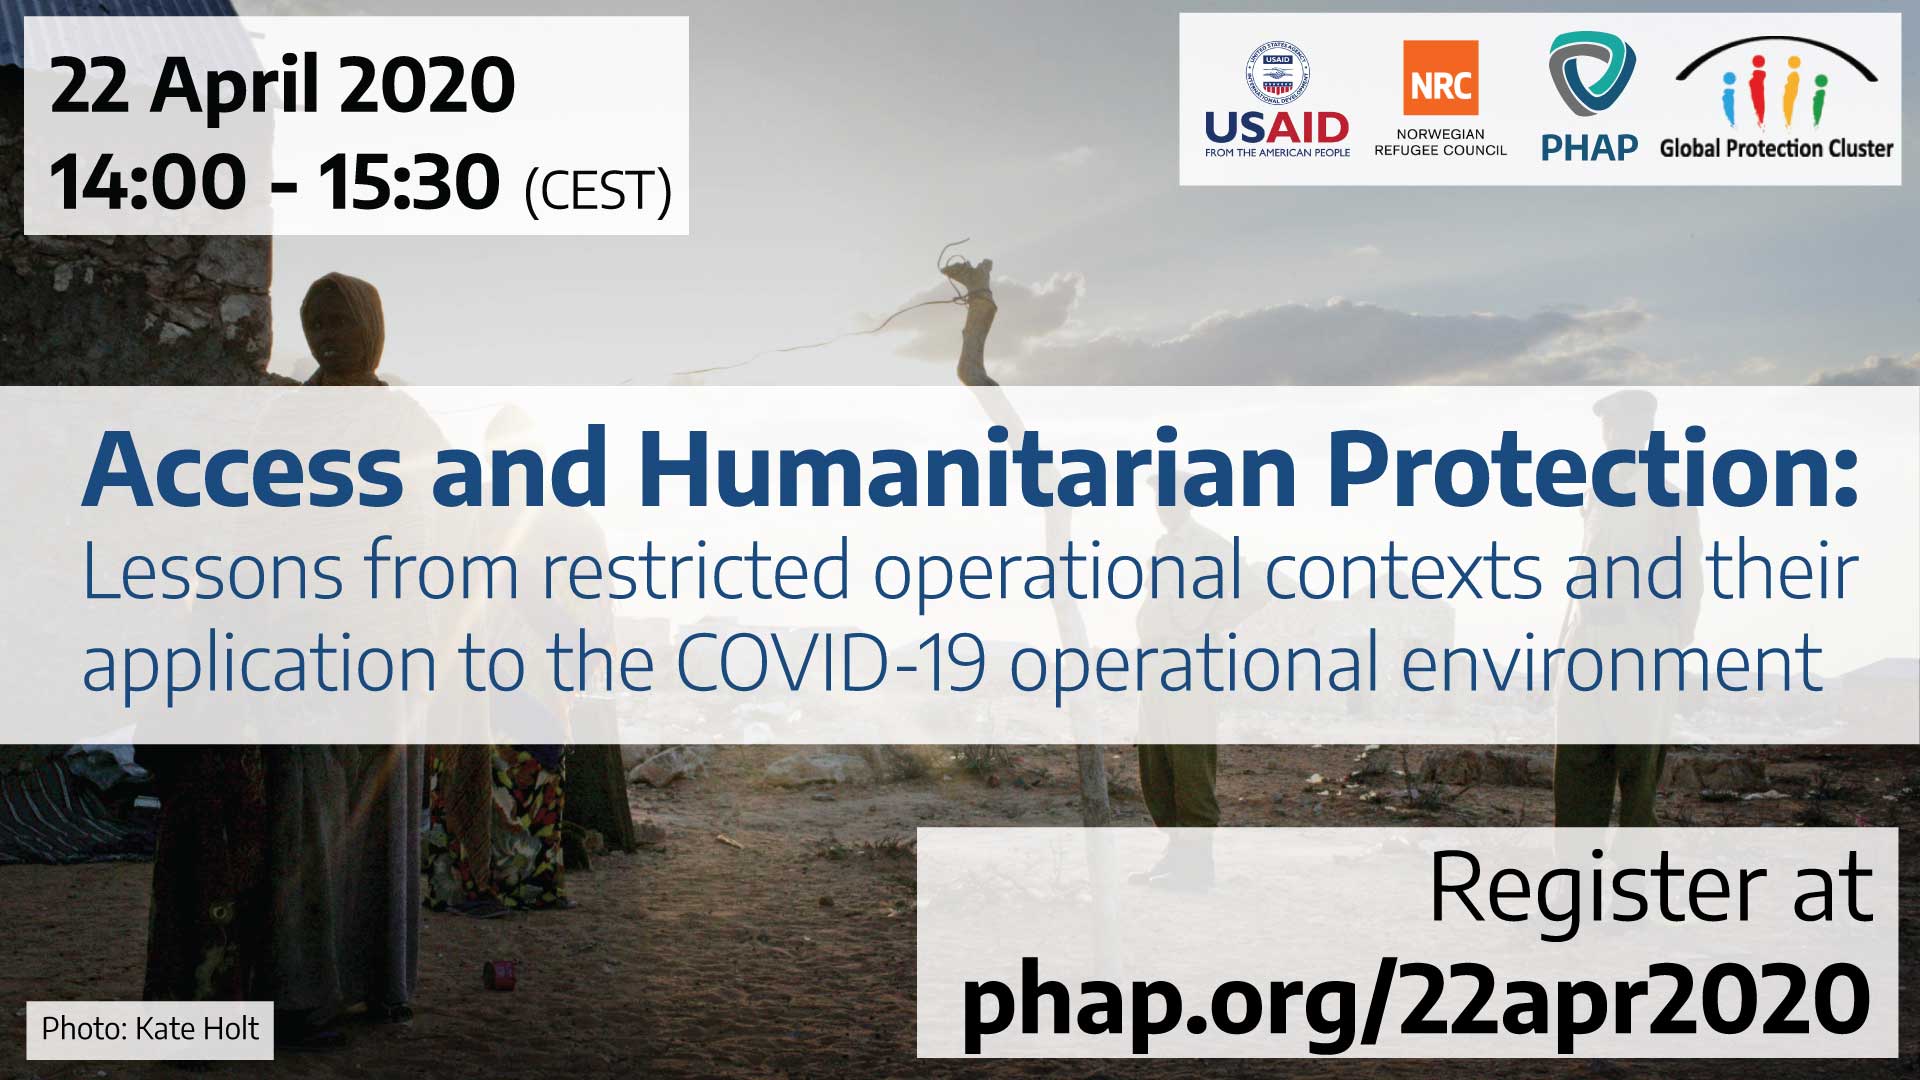 Banner for the webinar Access and Humanitarian Protection: Lessons from restricted operational contexts and their application to the COVID-19 operational environment